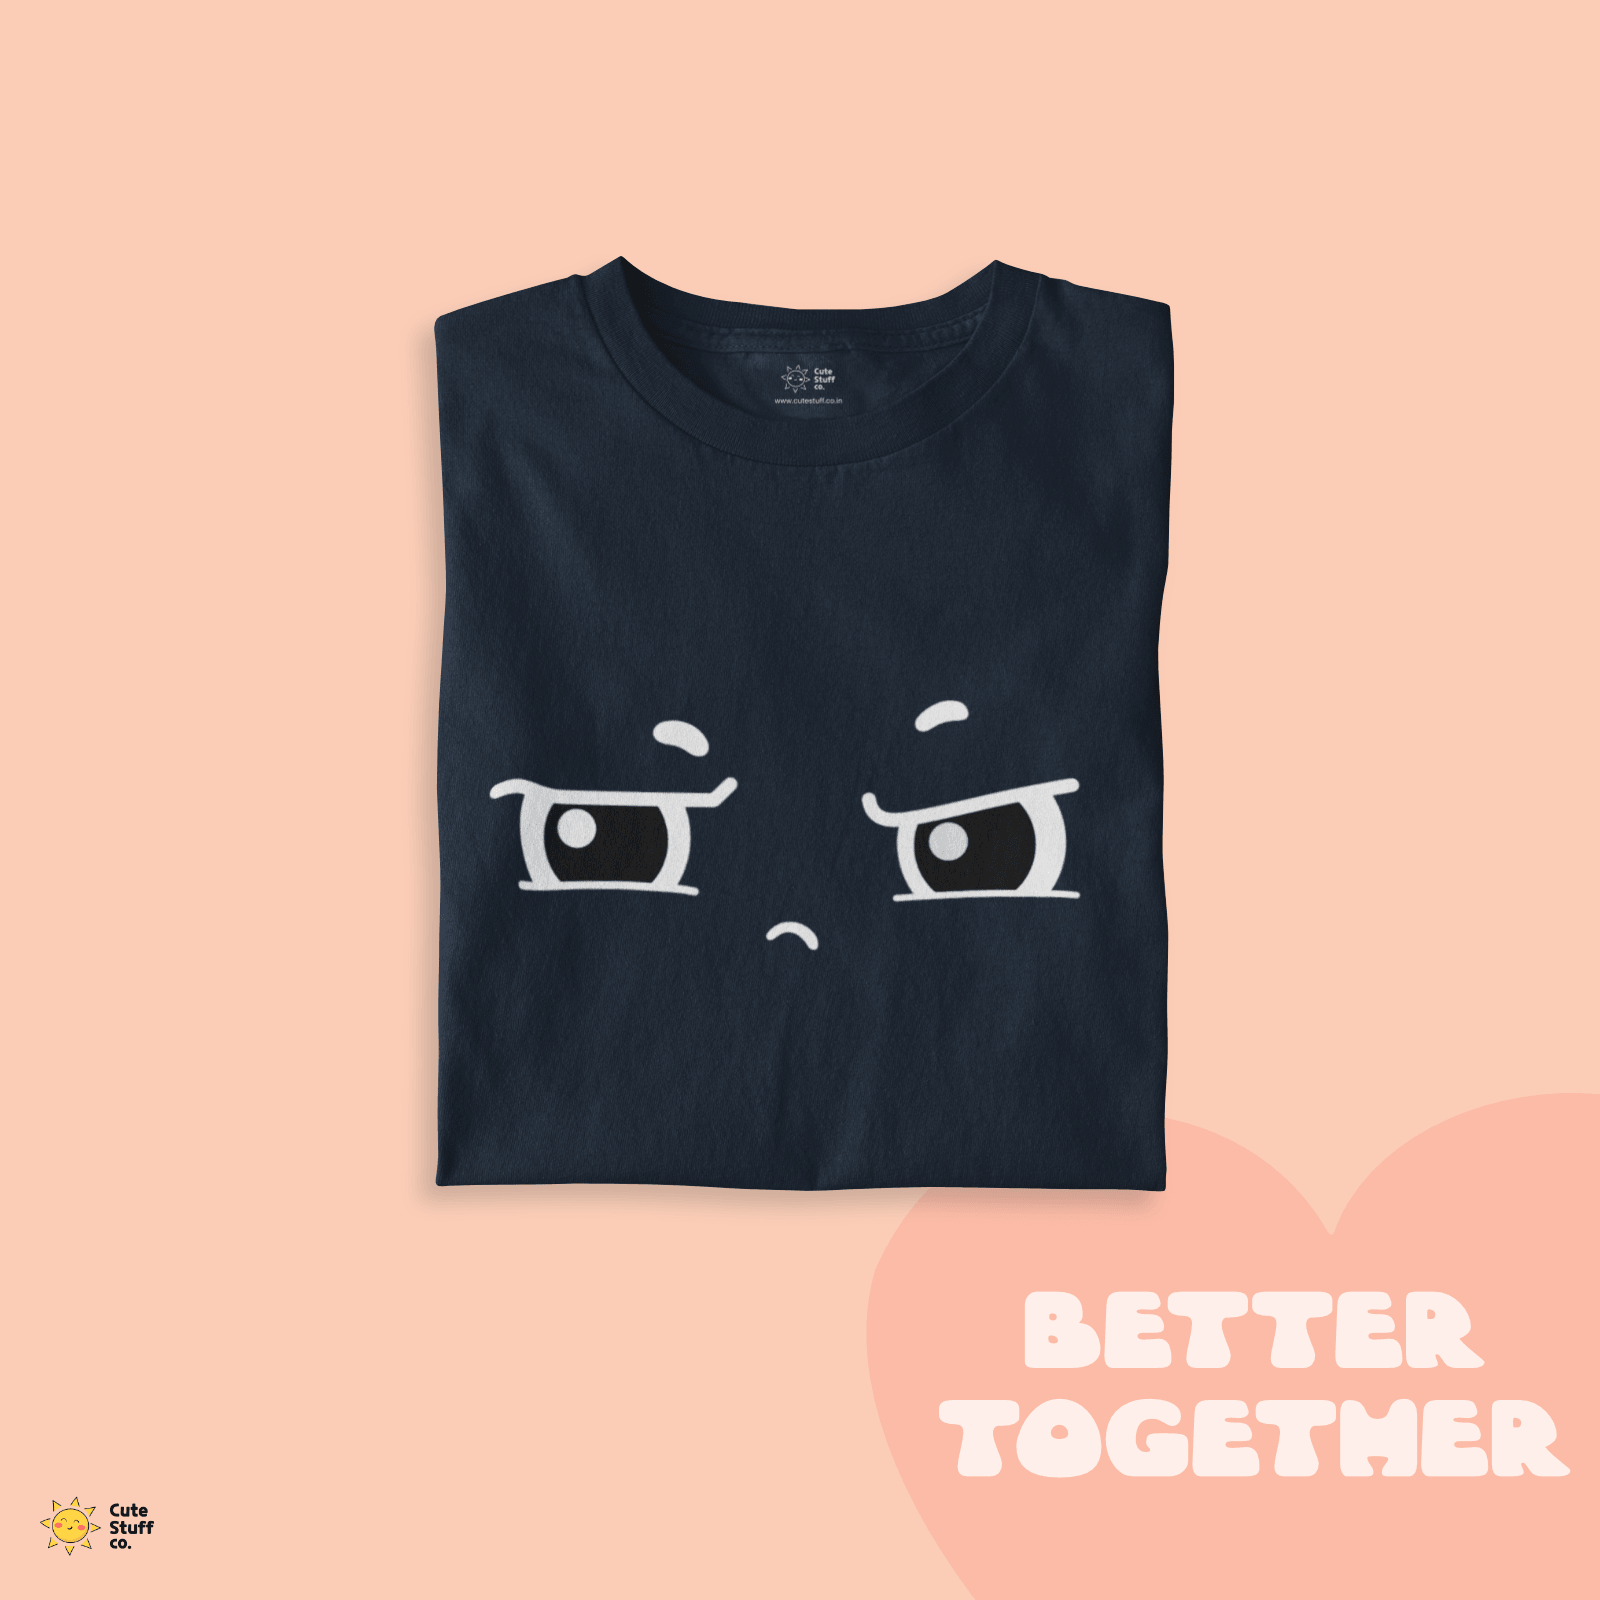 Cheeky Unisex Oversized T-shirts - Better Together